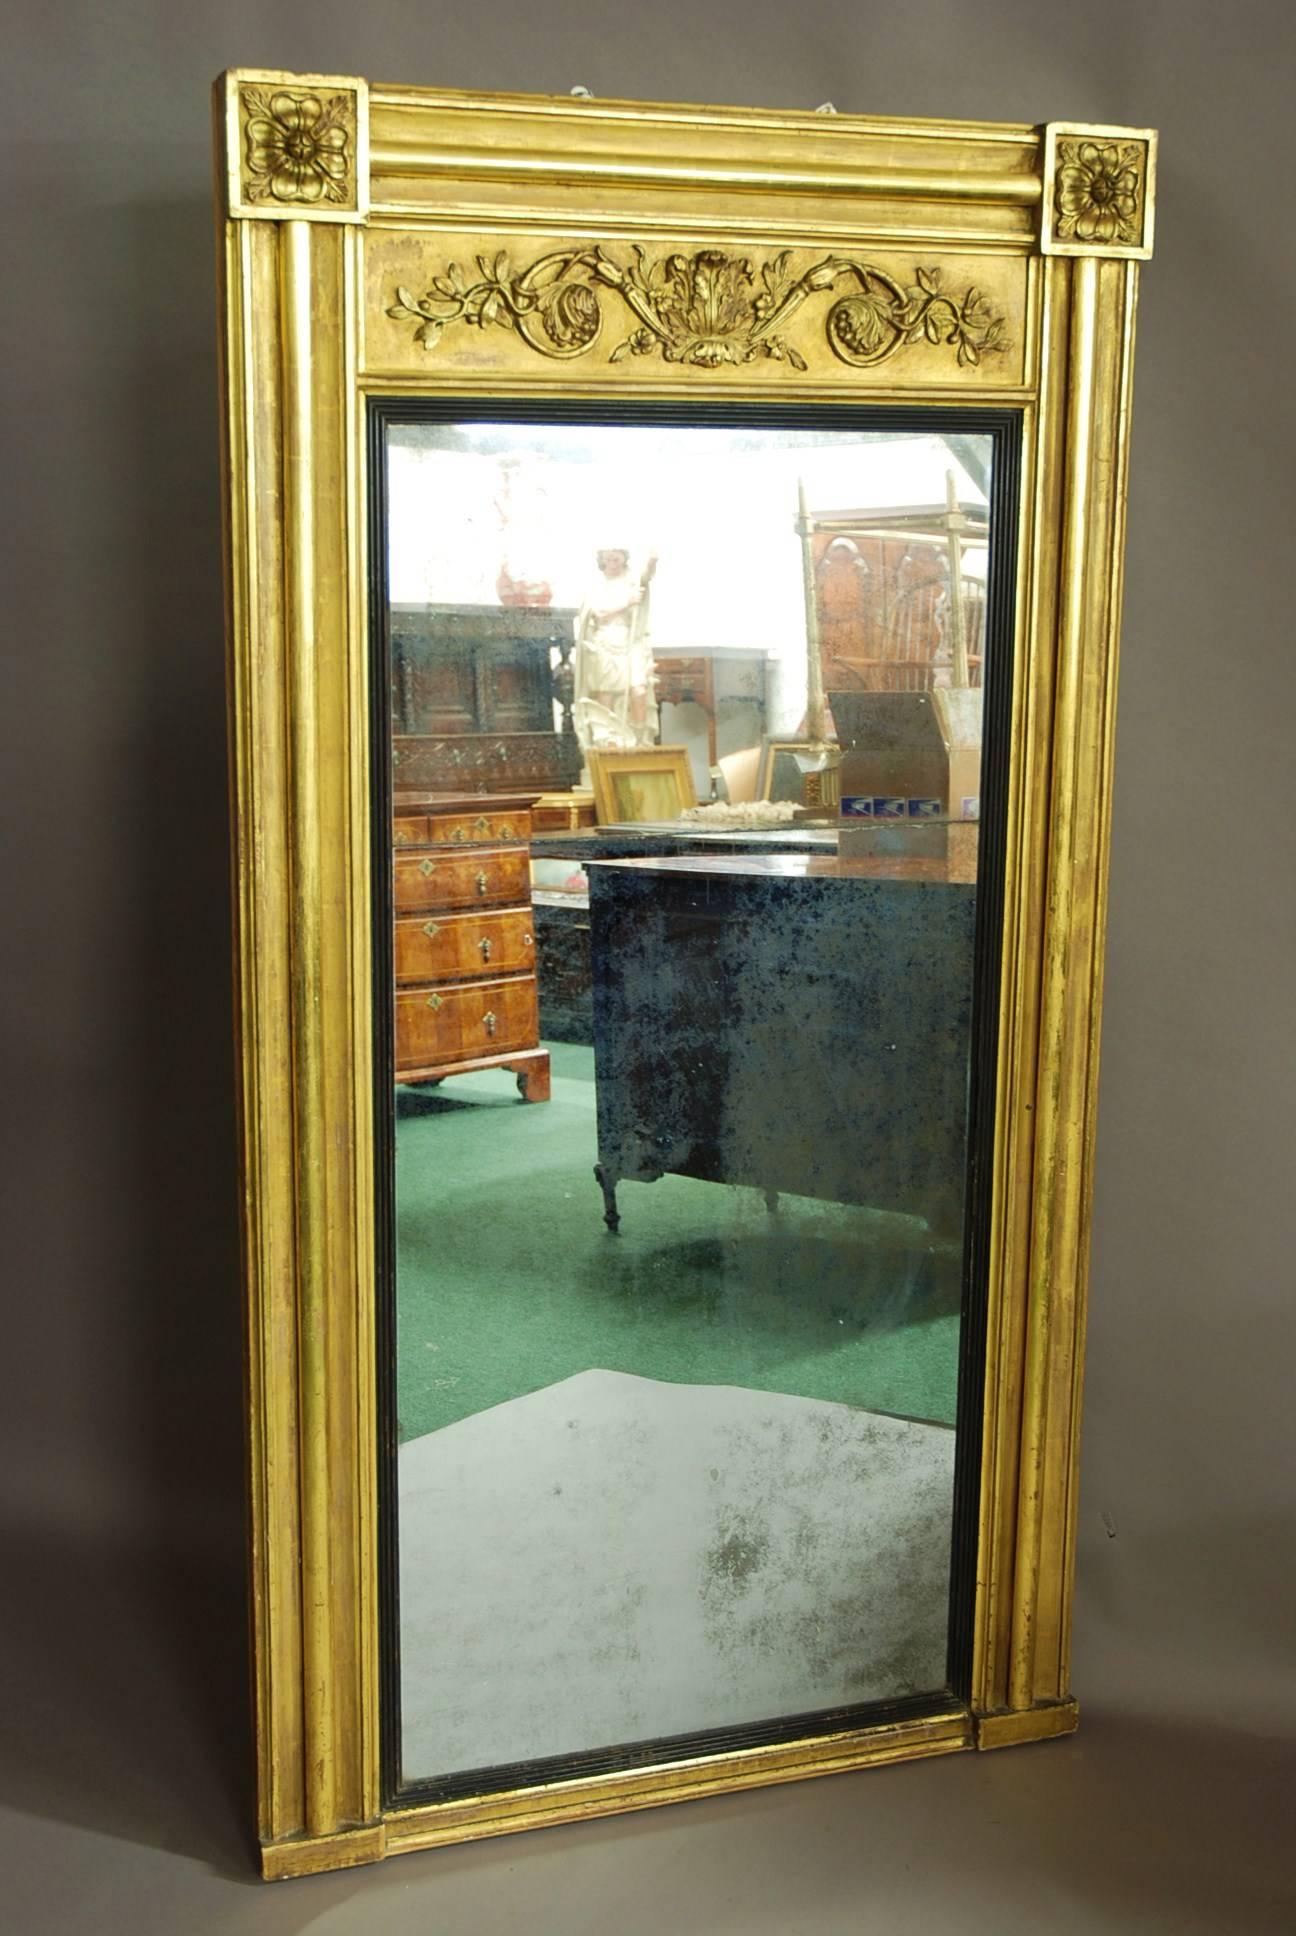 An early 19th century Regency wood and gesso gilt pier mirror of large proportions with original mirror plate.

The mirror consists of decorative corner blocks to each top corner of flower designs with a moulded edge to the top and the